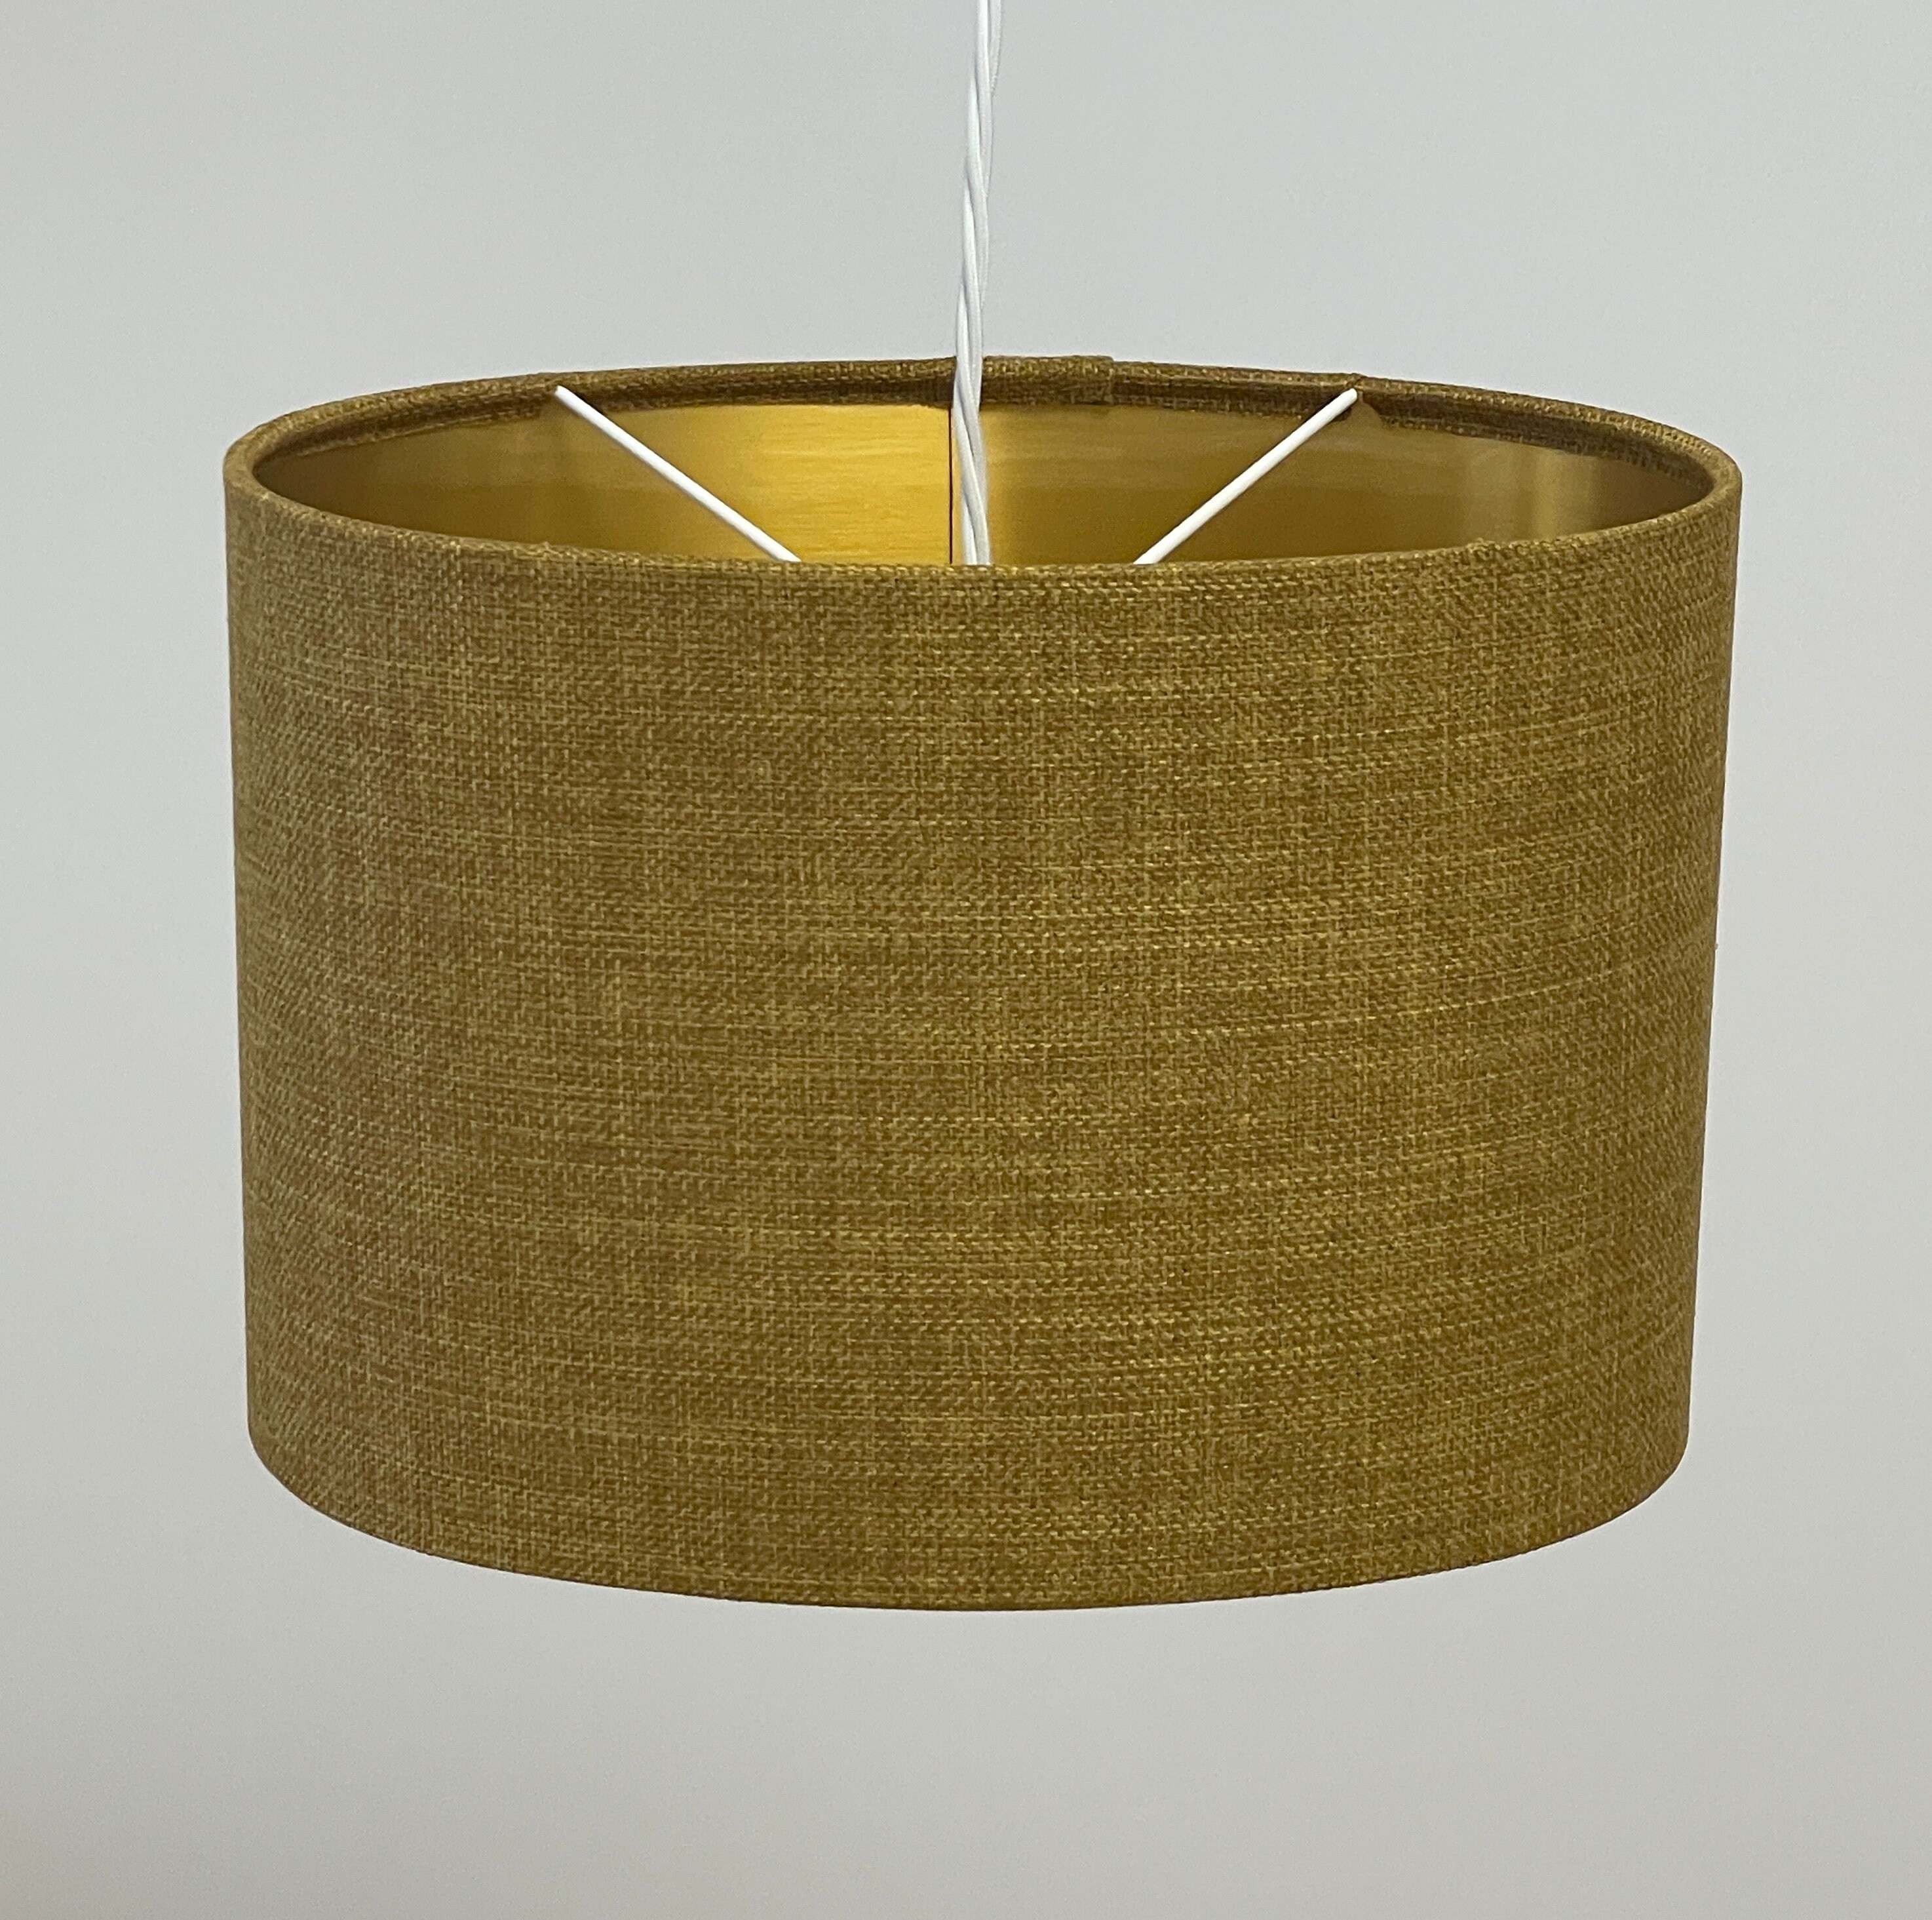 Mustard Yellow Textured Woven Fabric Drum Lampshade with Brushed Gold Ceiling 